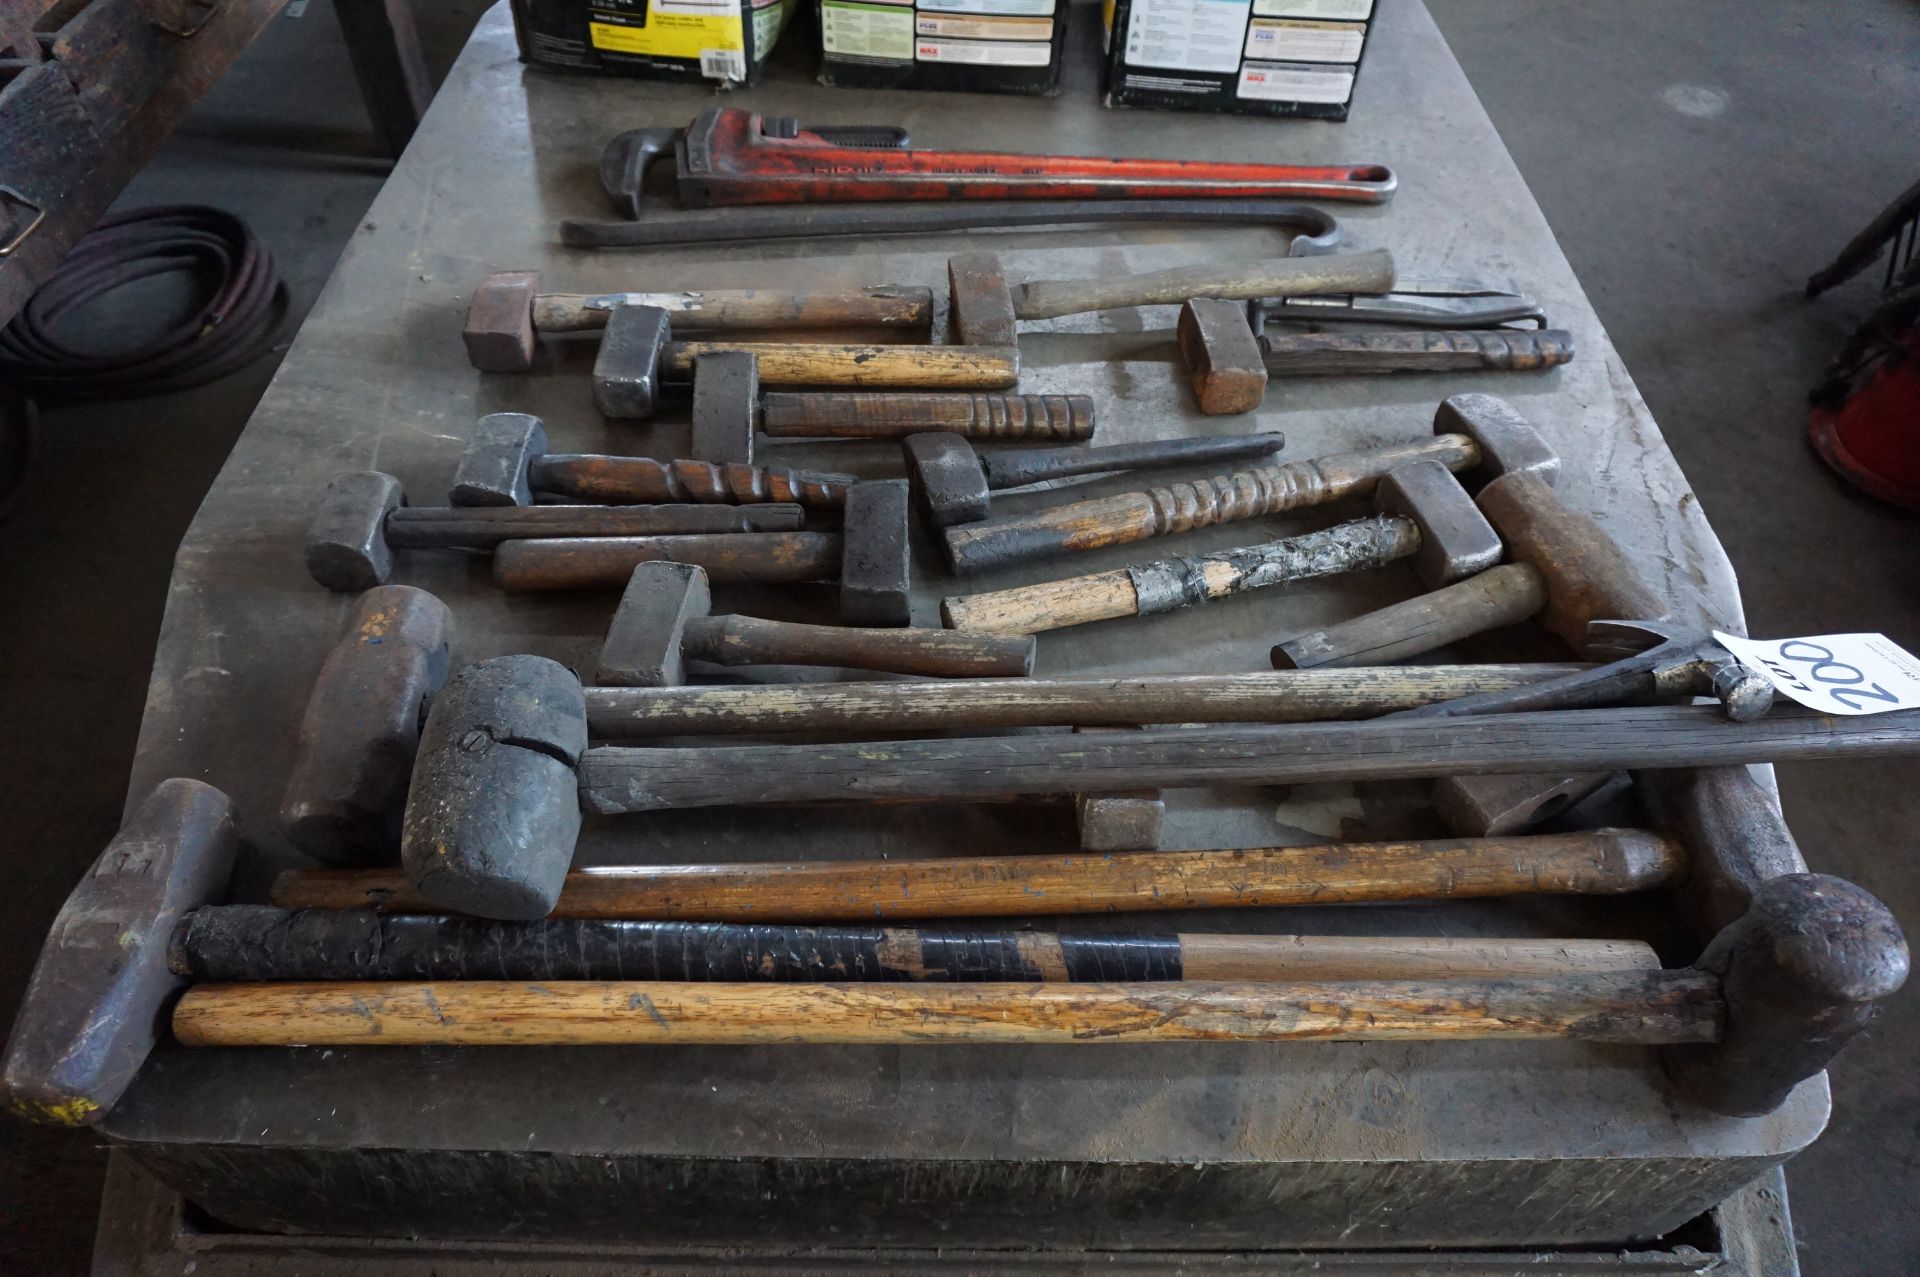 LOT TO INCLUDE: MISC. SLEDGEHAMMERS, METAL WORKING MALLETS AND HAMMERS, CROWBAR, AND RIDGID PIPE - Image 3 of 4